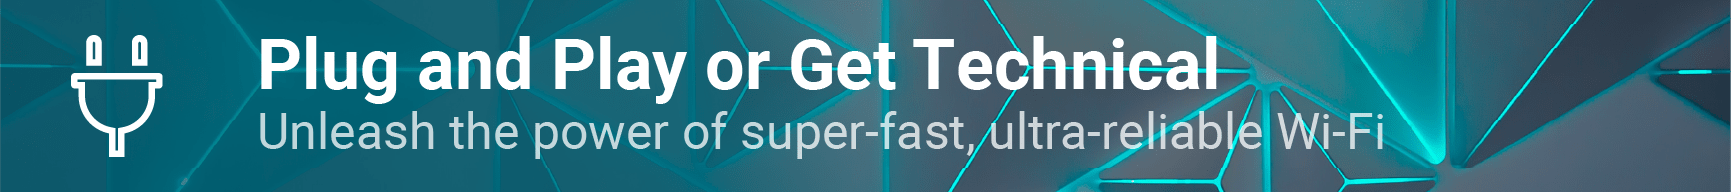 Plug and Play or Get Technical. Unleash the power of super-fast, ultra-reliable Wi-Fi.